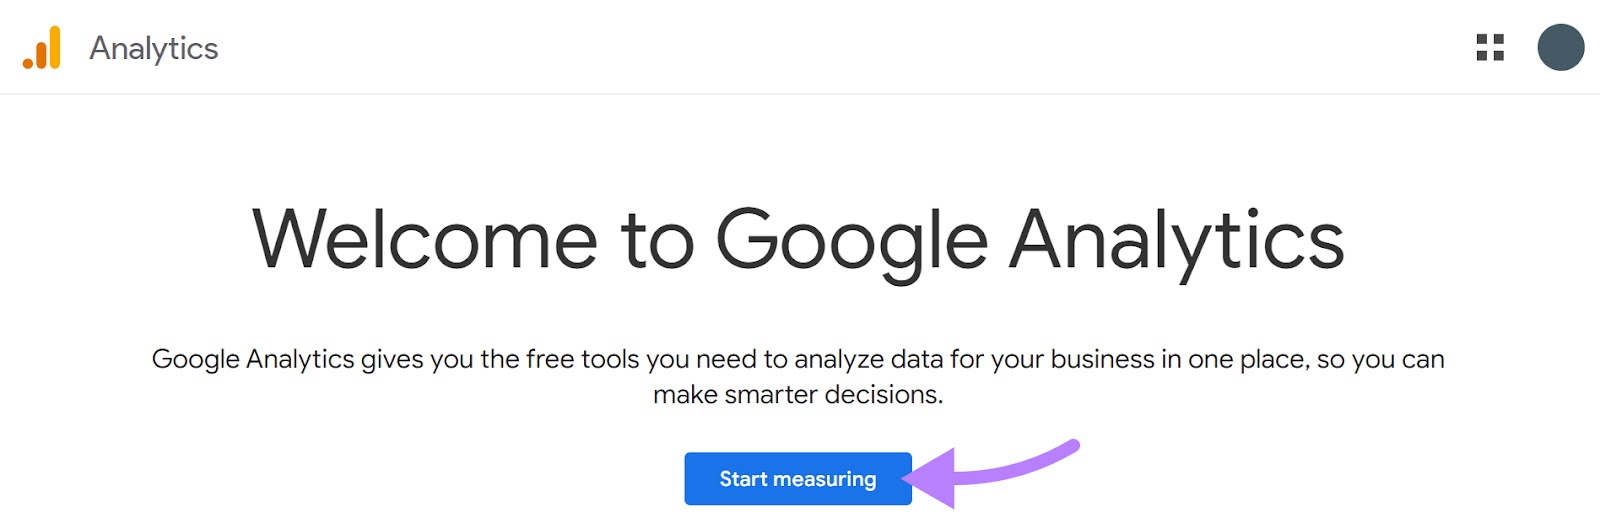 Welcome to Google Analytics page